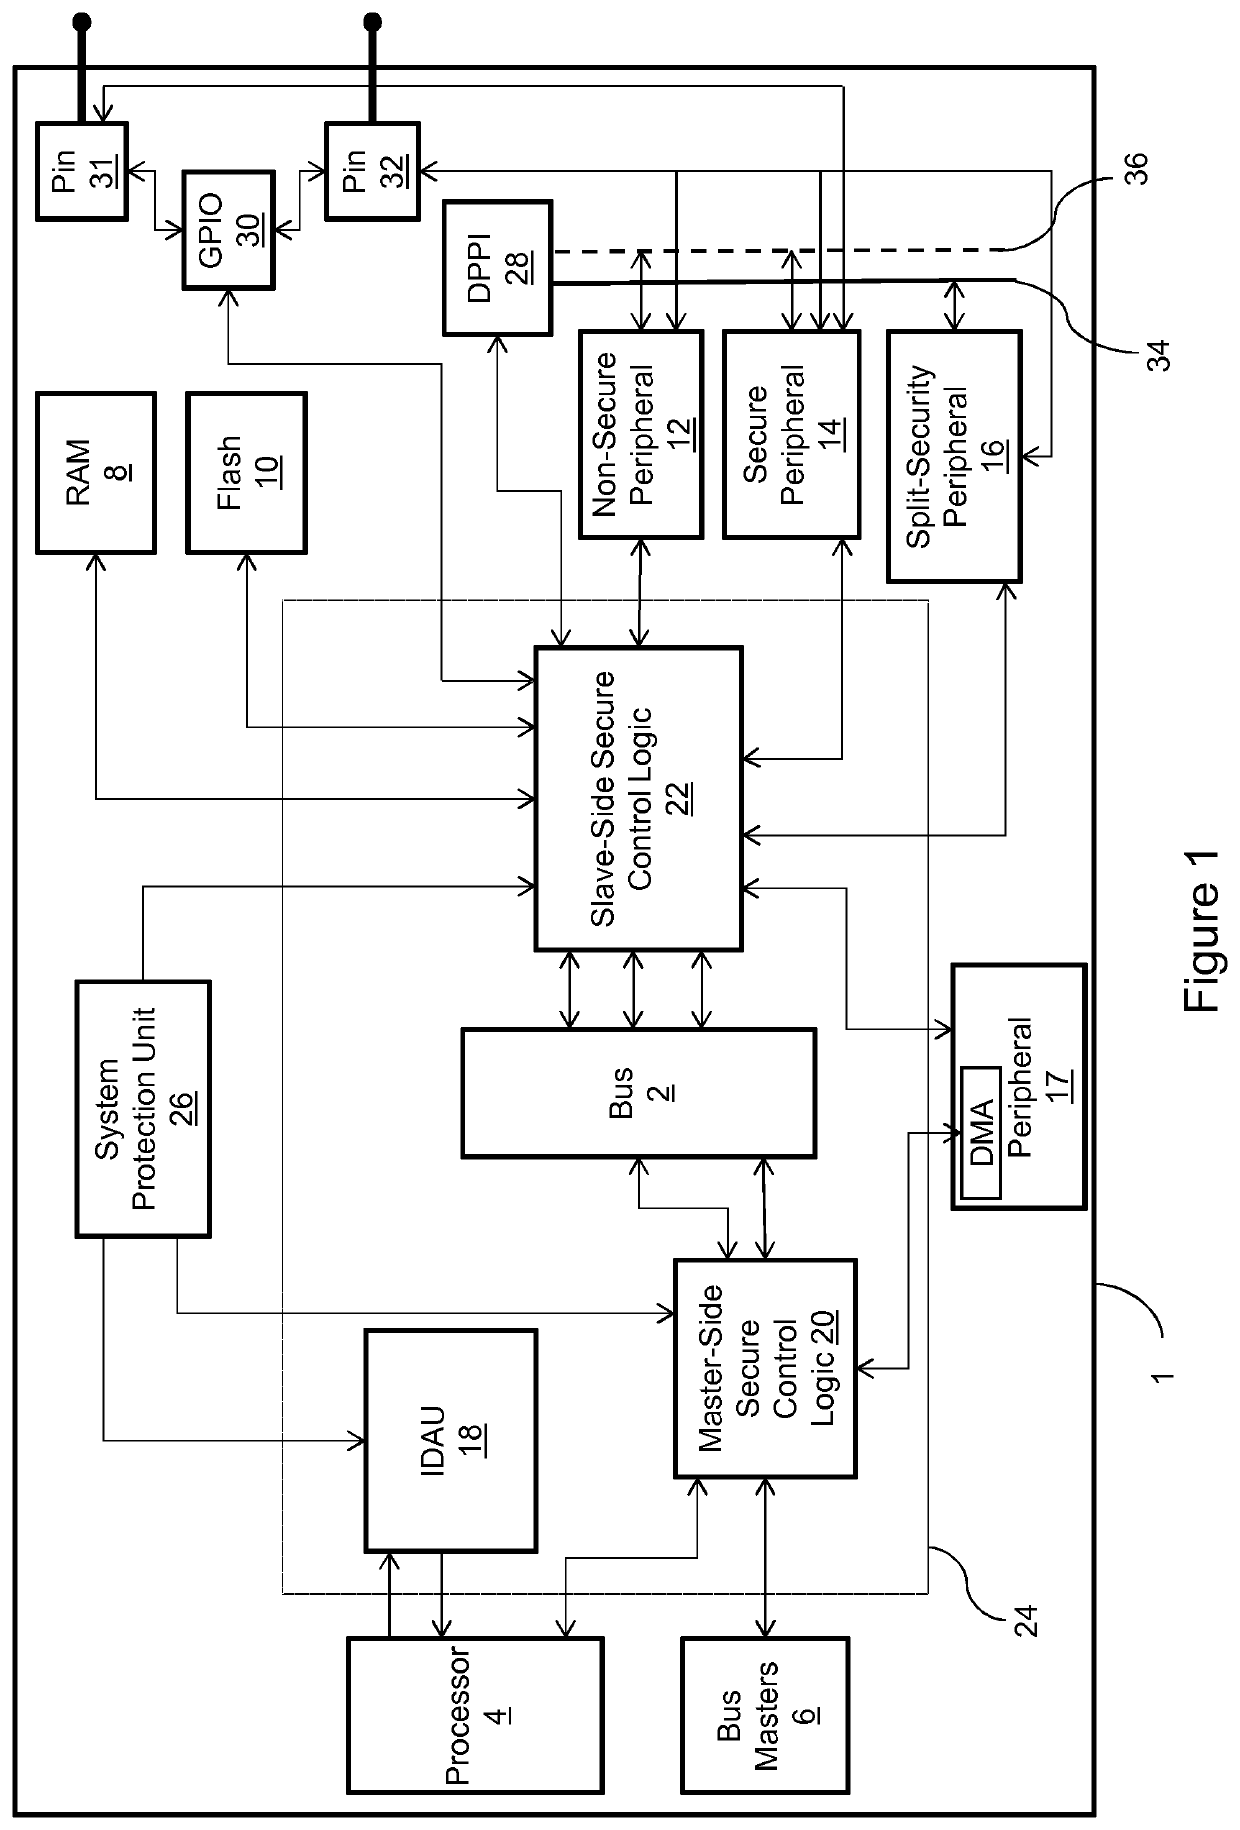 Peripheral access on a secure-aware bus system